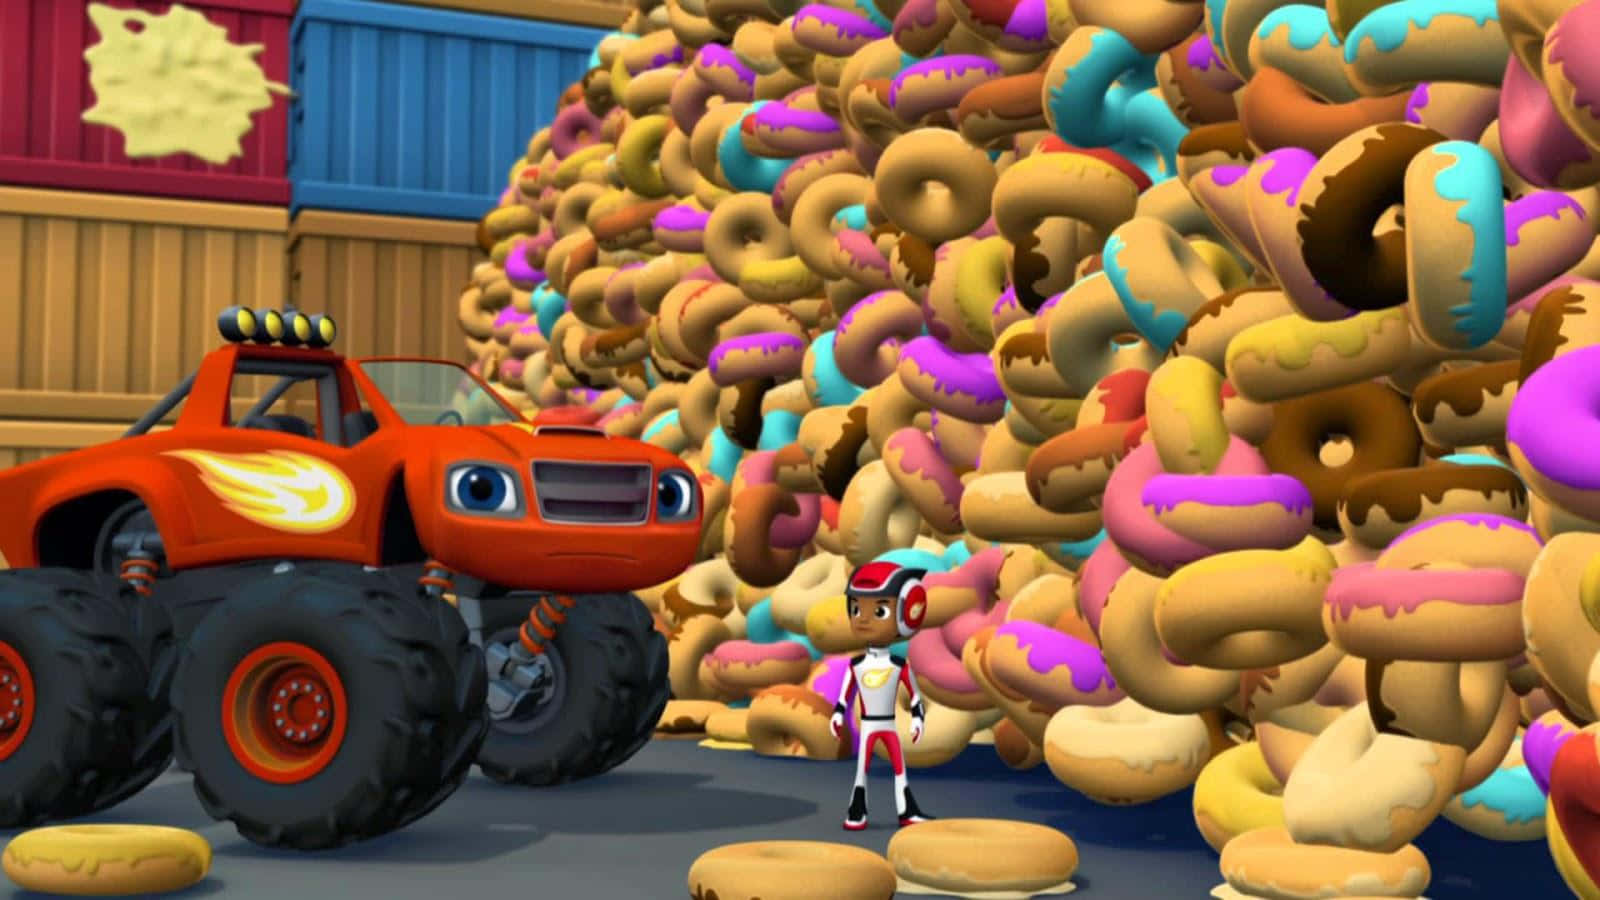 Blaze and AJ explore the wilds of Axle City in their Monster Machines